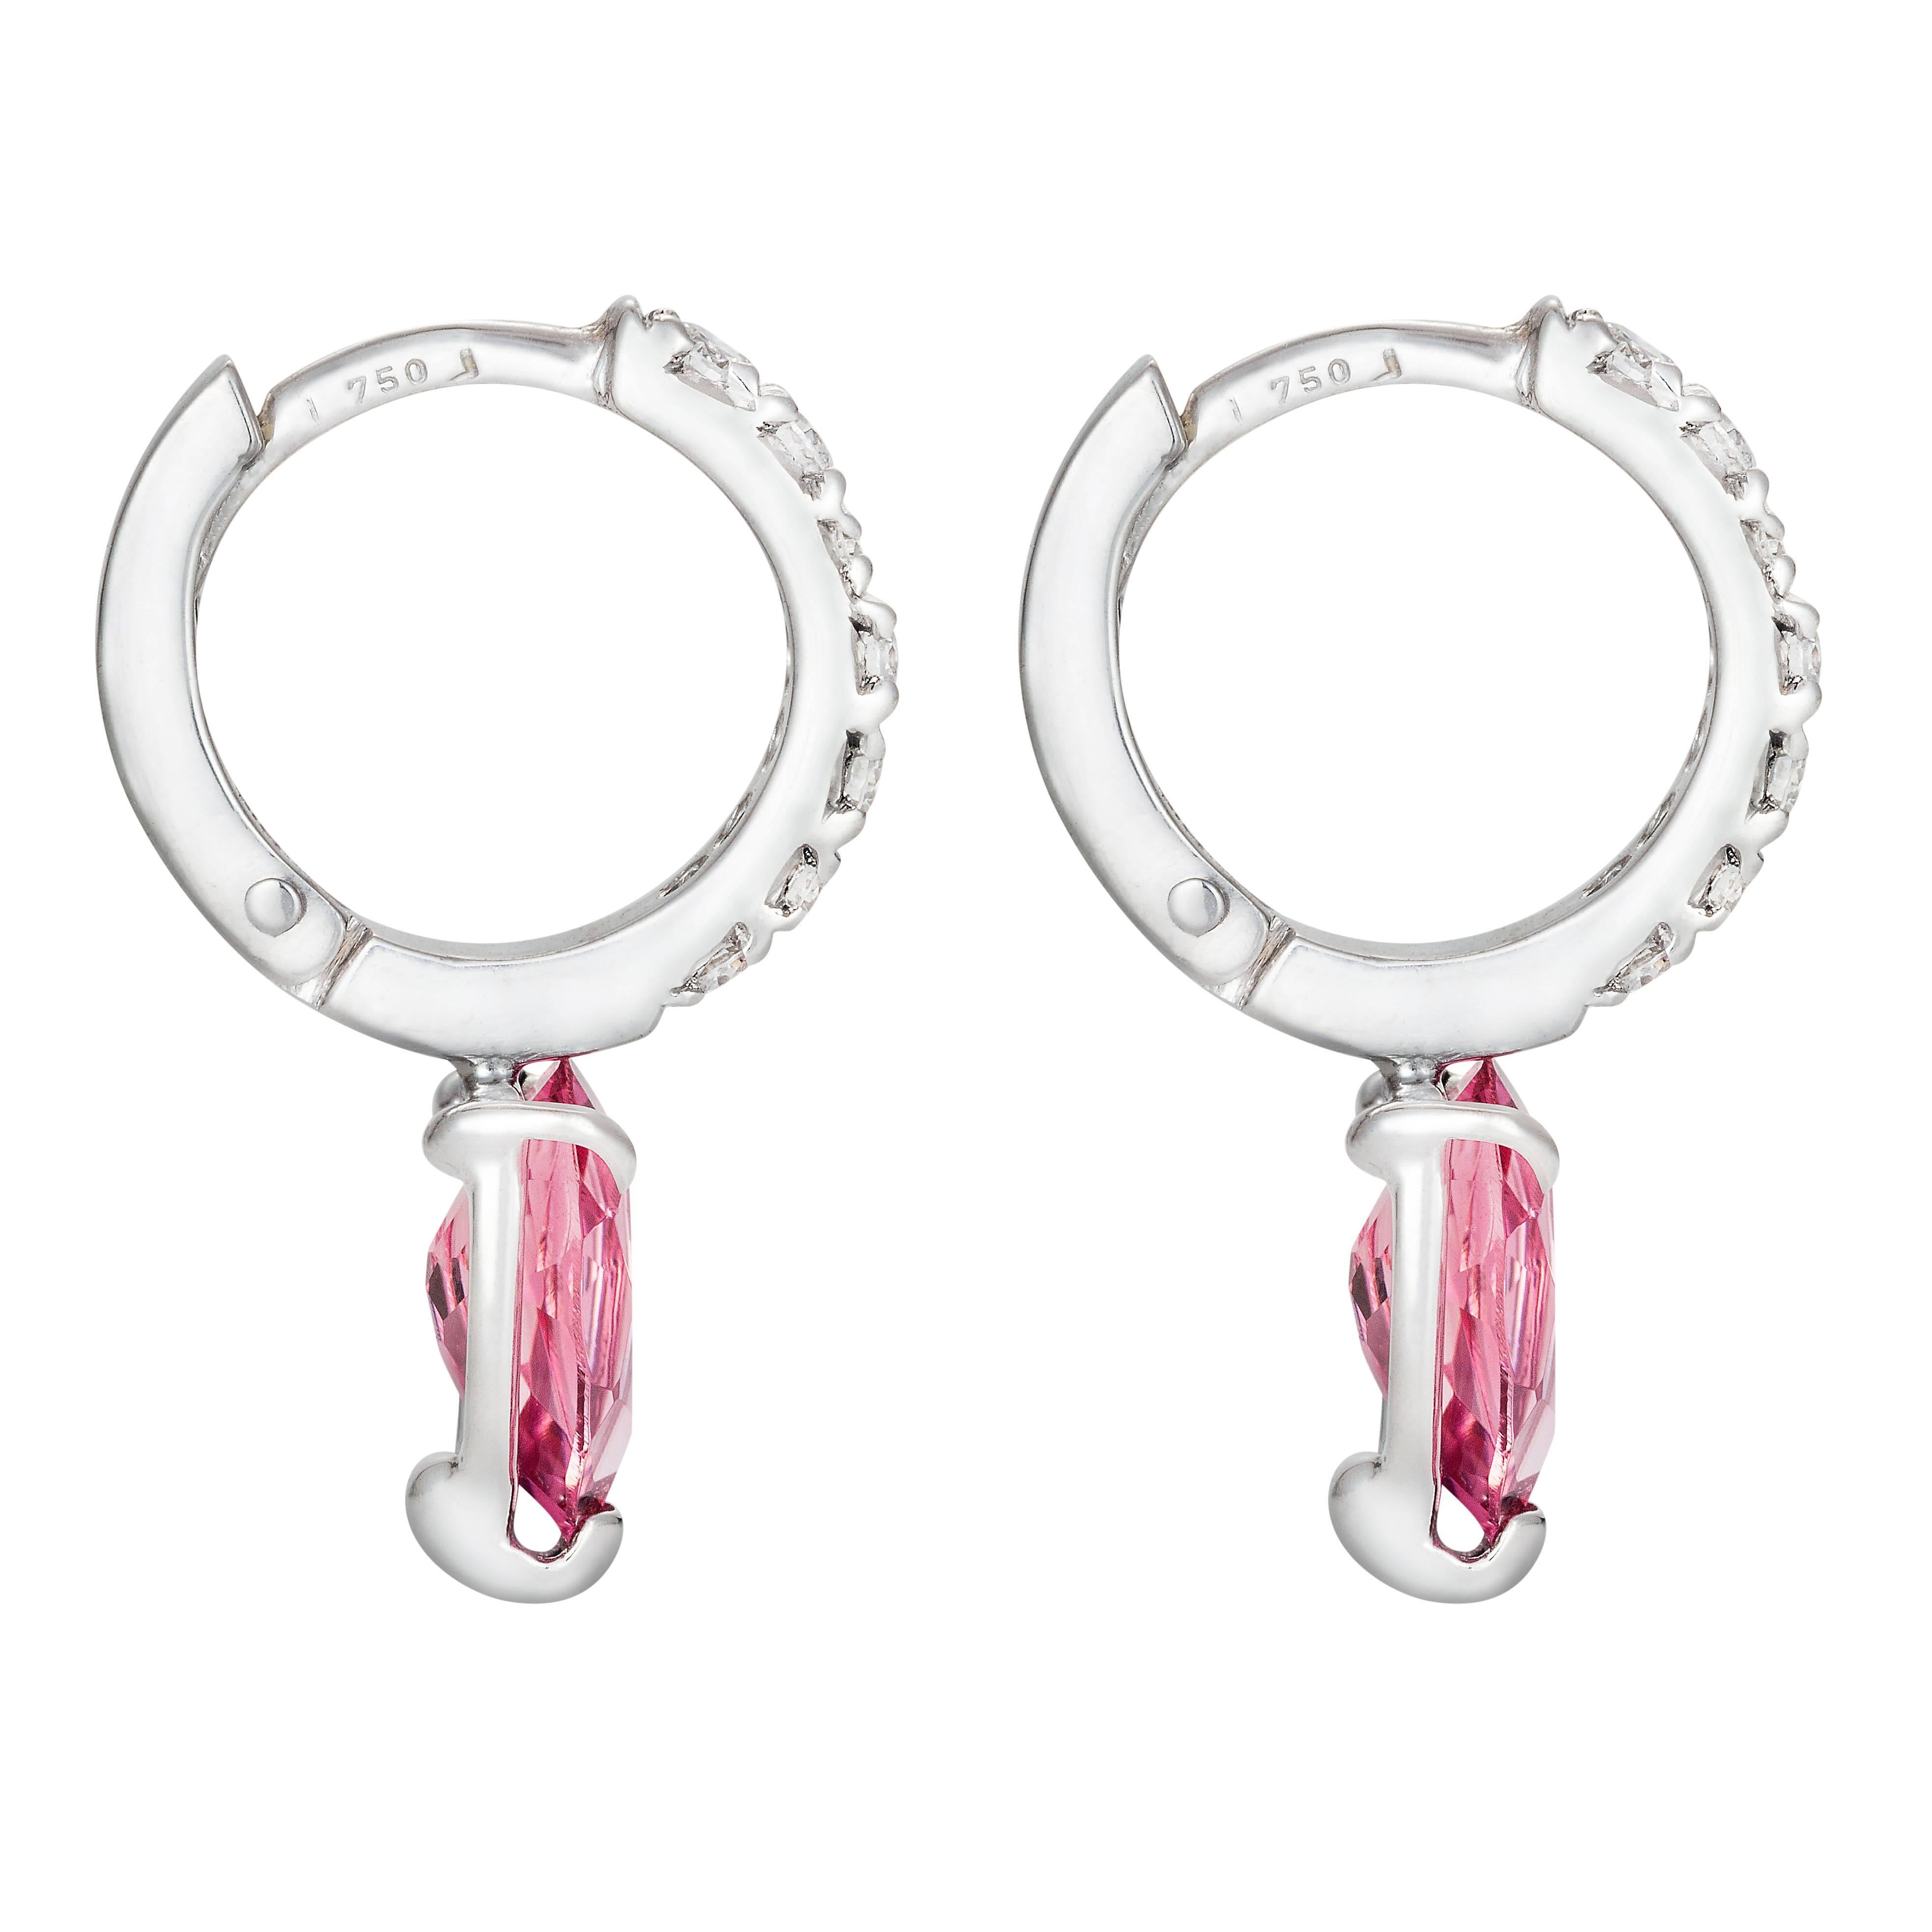 These DUBINI earrings from the 'Theodora' collection feature rubellite tourmaline drops with diamonds set in 18K white gold.

…………………………………………………………………………………………………………………………………………………………………….

Inspired by Empress Theodora, wife of Justinian I, she was